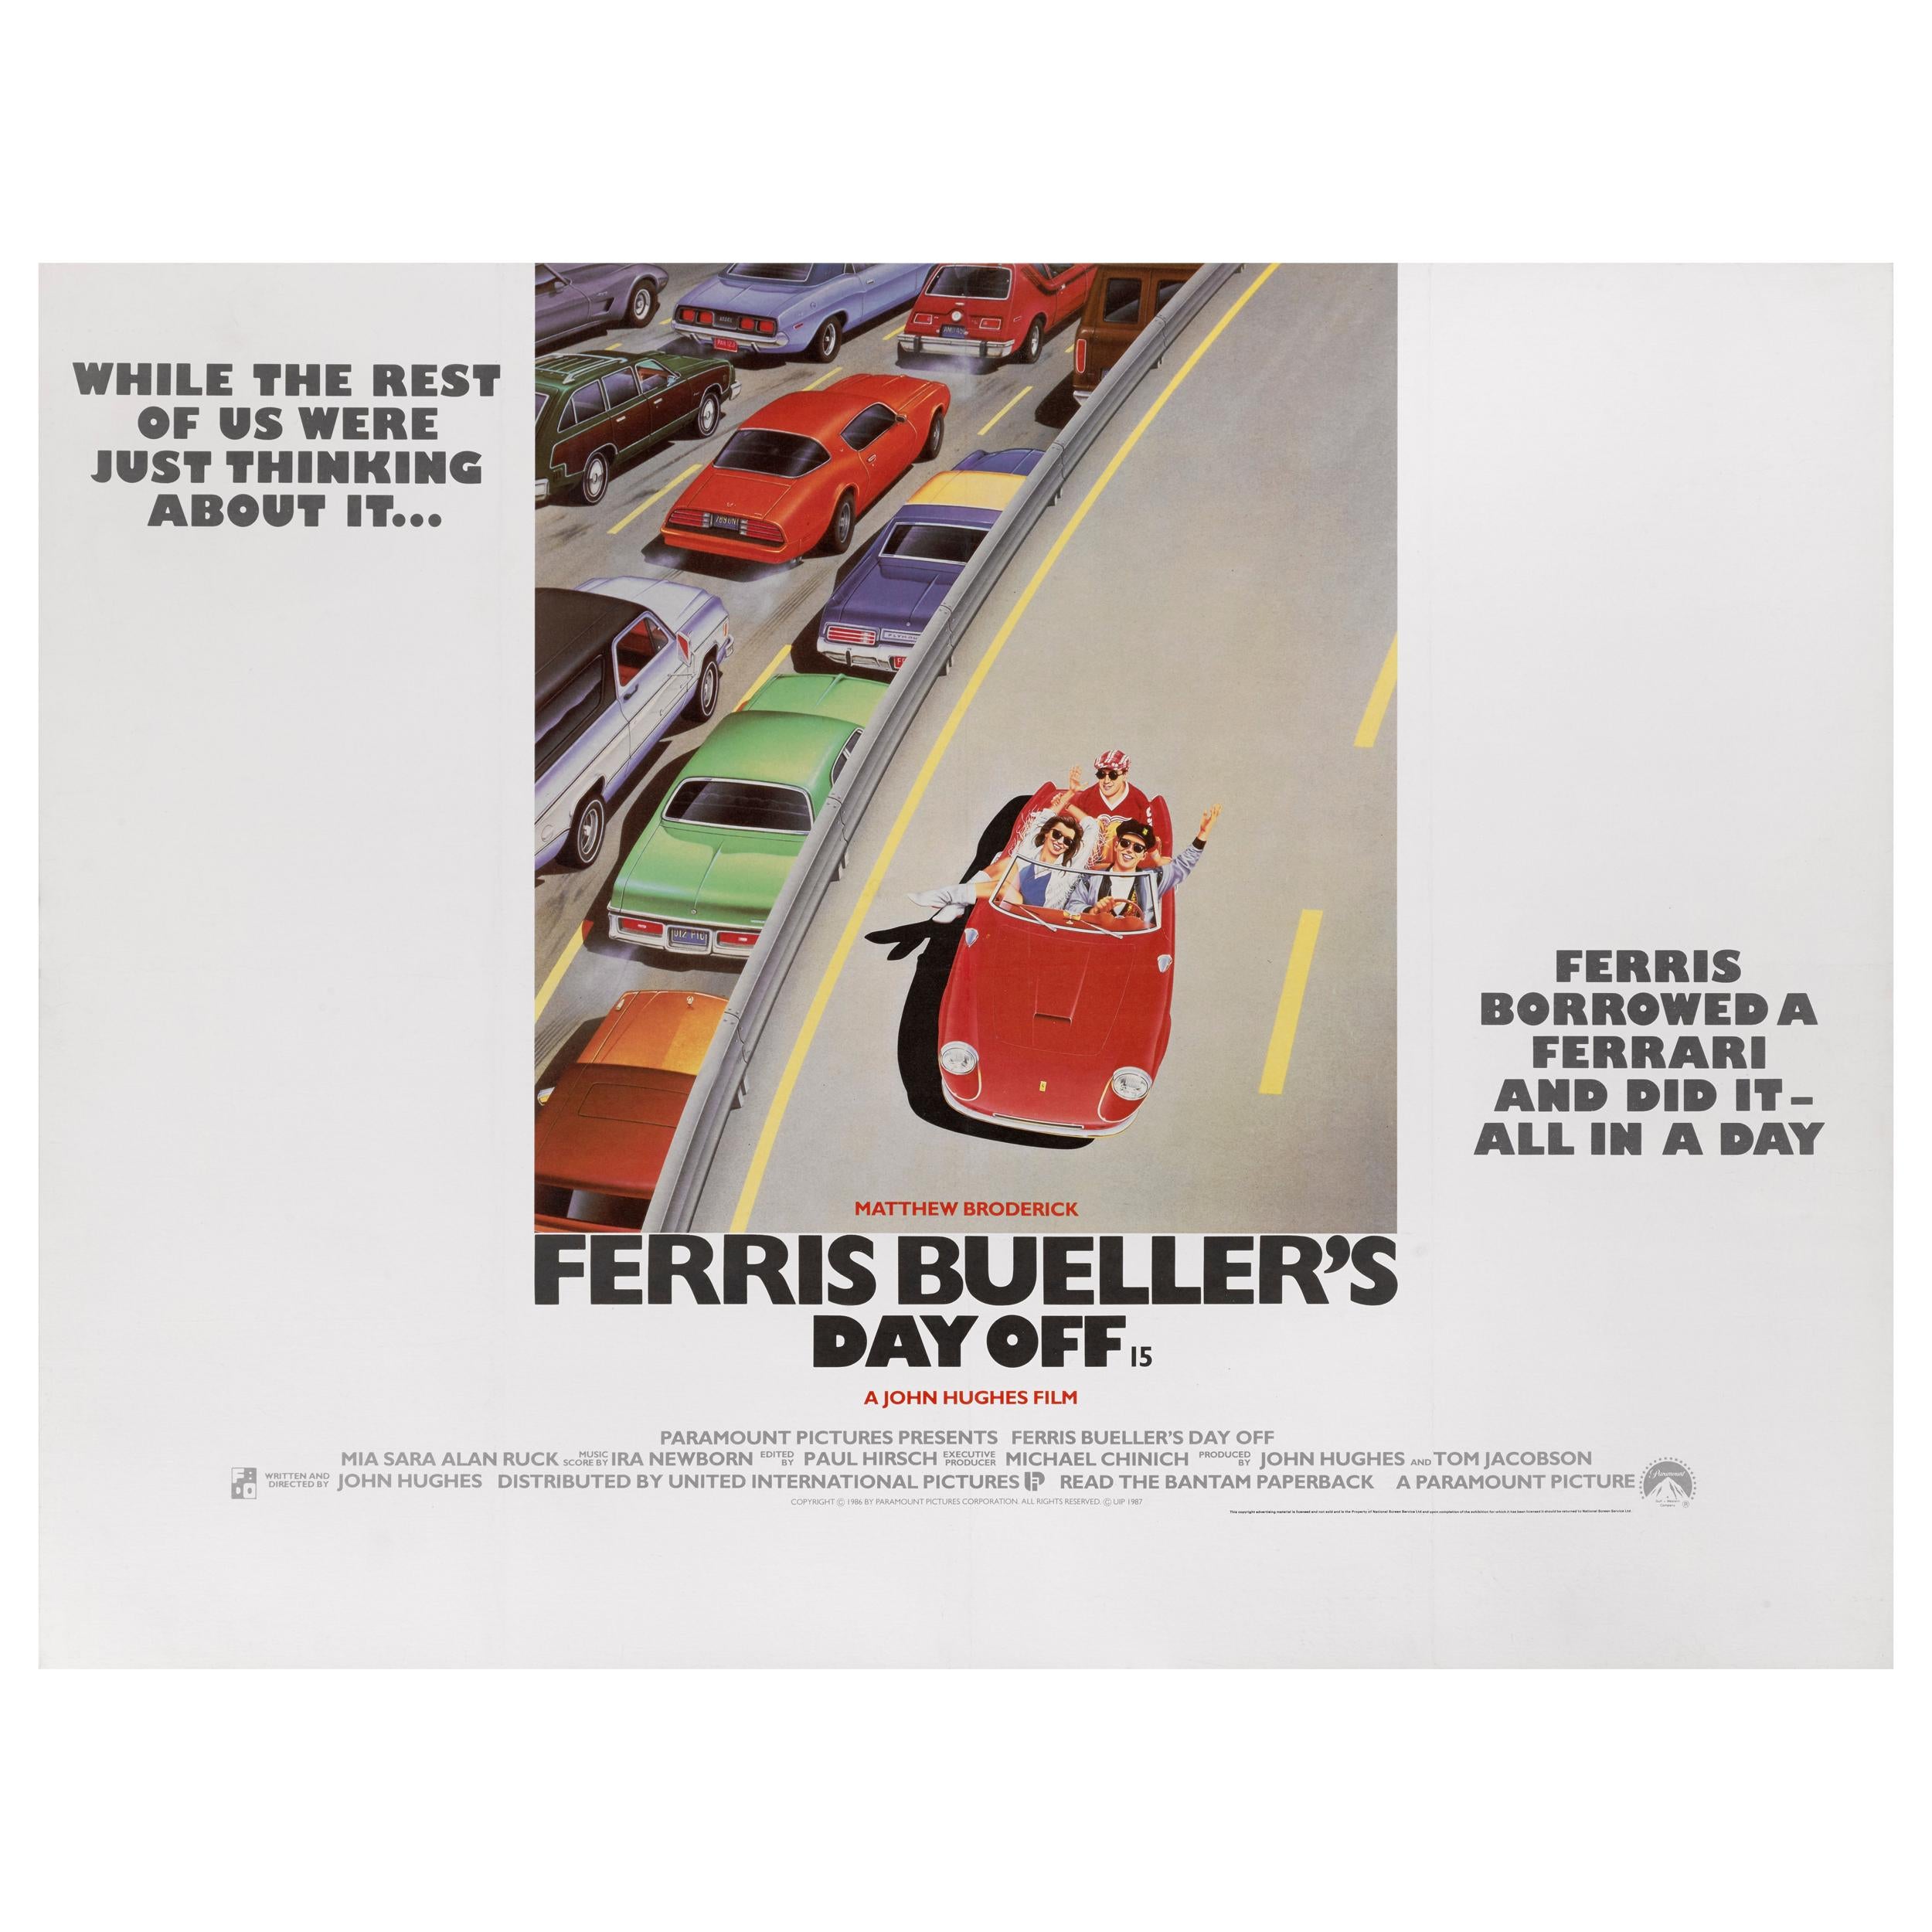 The Beatles in 'Ferris Bueller's Day Off' – Classic Rock at the Movies